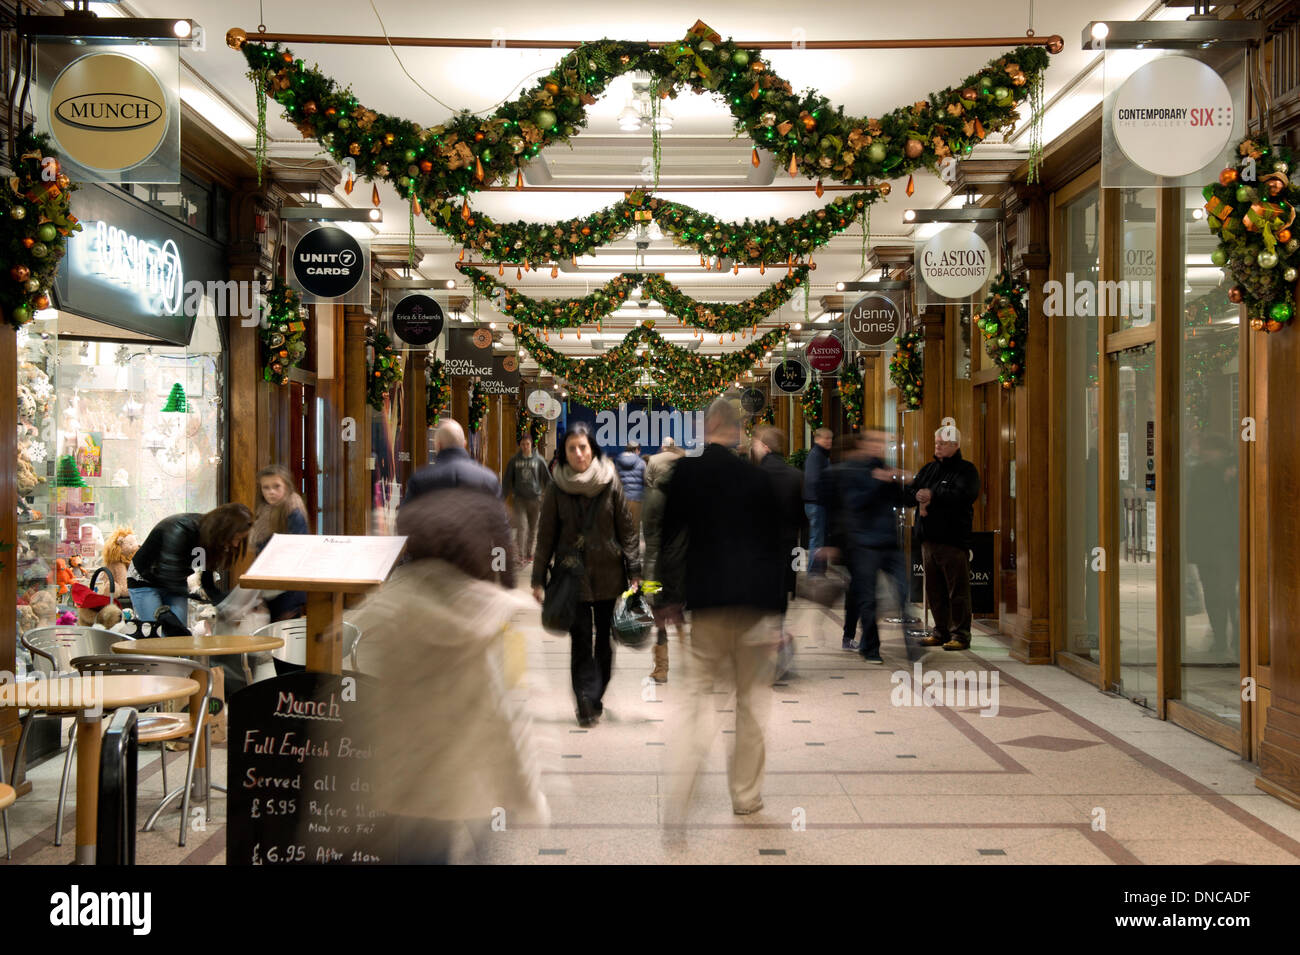 Manchester, UK. 22nd December, 2013. Christmas shoppers walk past independent stores in a small shopping mall during the lead up to the festive period. Both independent and chain stores attract customers in the lead up to the big day. Credit:  Russell Hart/Alamy Live News Stock Photo